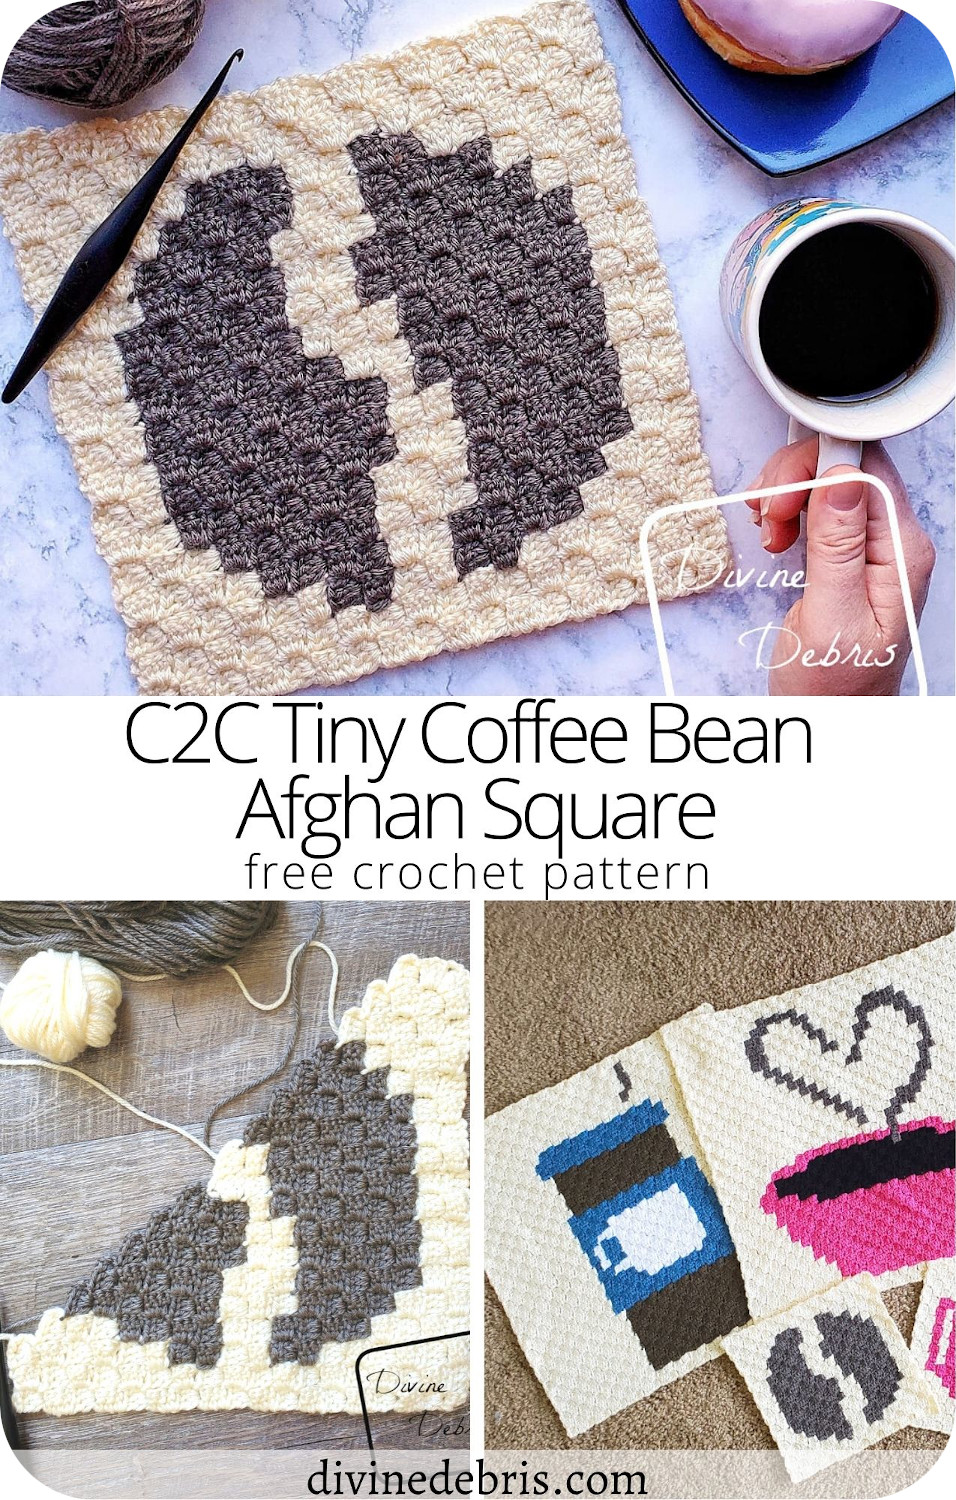 Learn to make the Tiny Coffee Bean C2C Afghan Square, and discover the 2020 C2C Coffee CAL, from a free pattern on DivineDebris.com